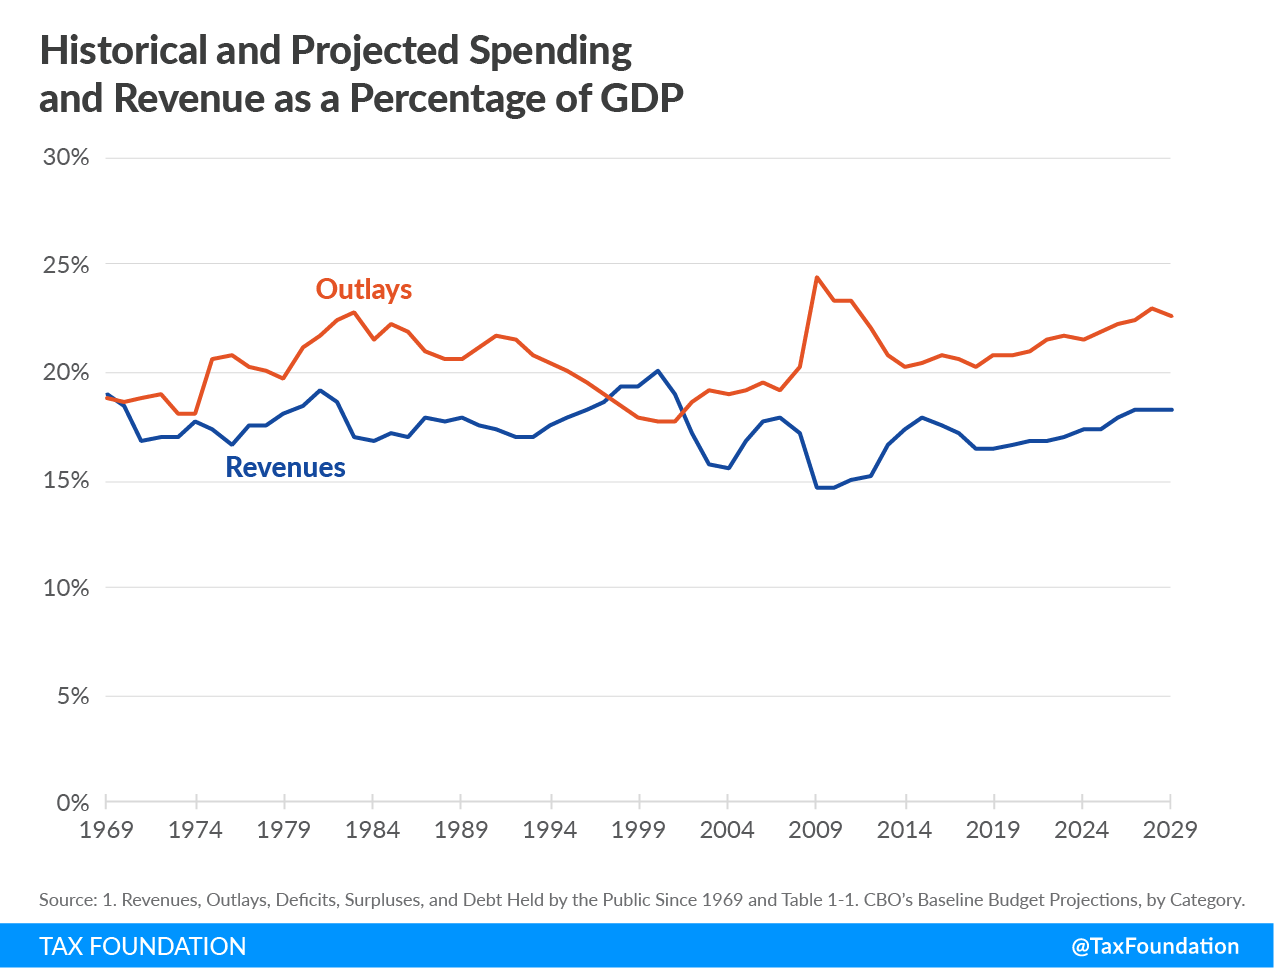 Historical and projected spending and revenue as a percentage of GDP